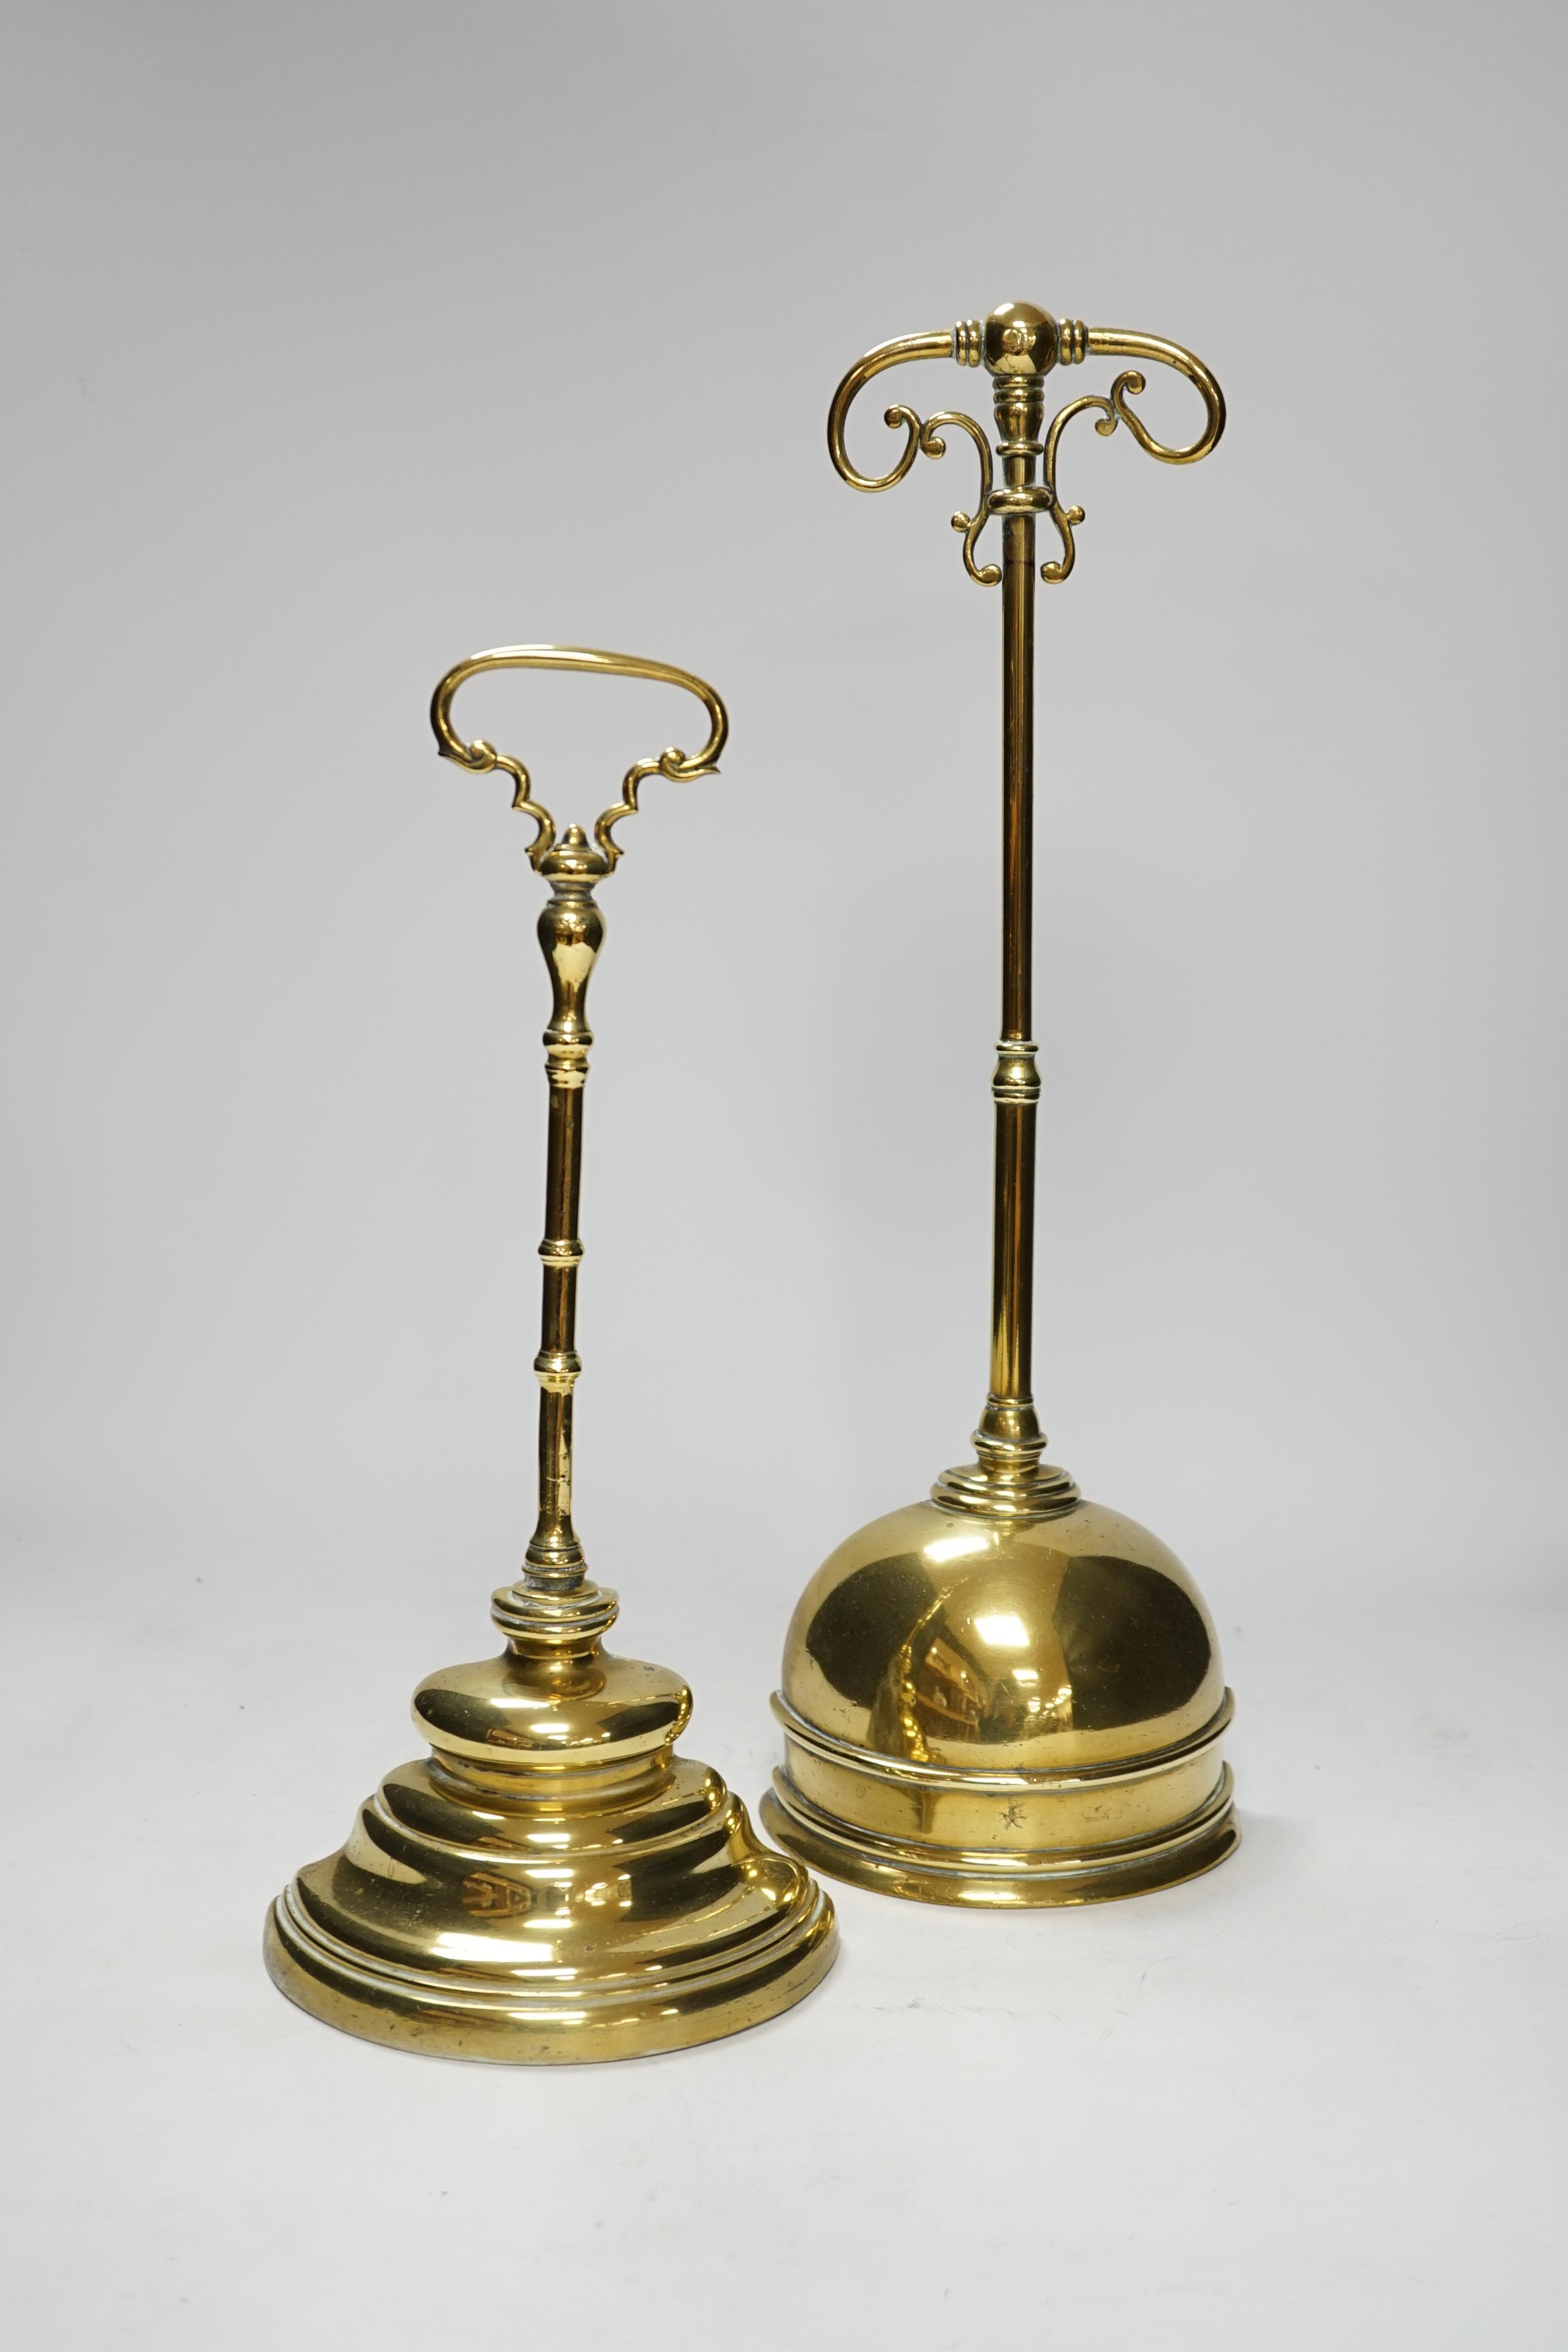 Two early 19th century cast brass door stops, with moulded stepped plinths, largest 45cm high